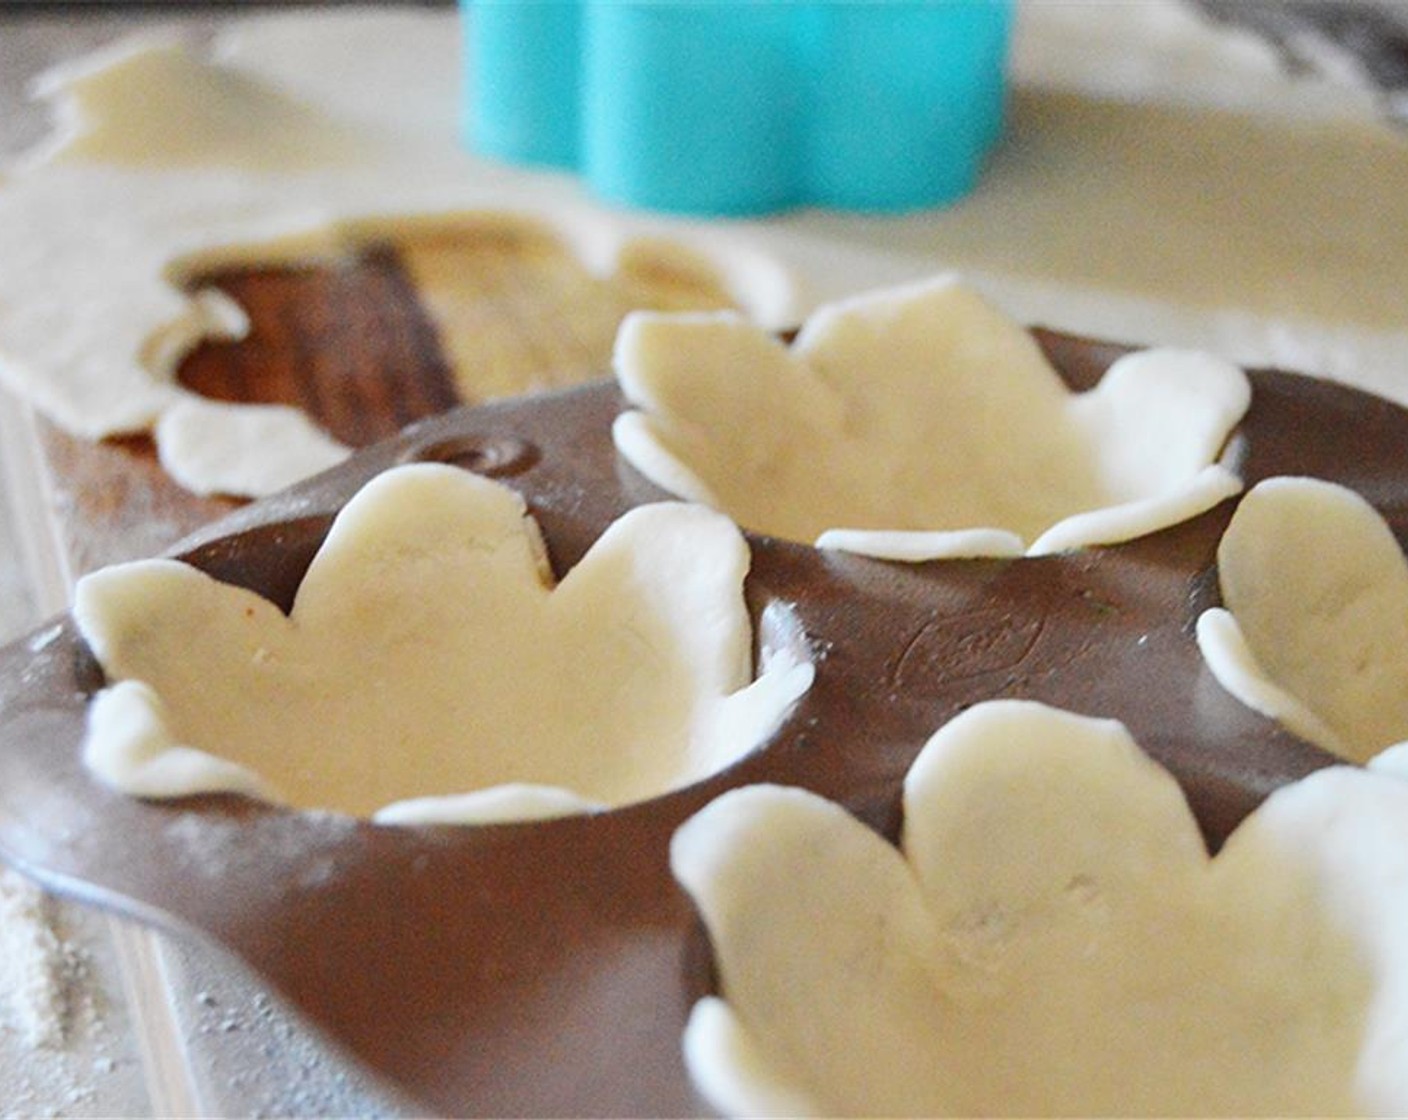 step 3 Use flower cookie cutter to cut out flowers. Press flowers into greased muffin tin cups.